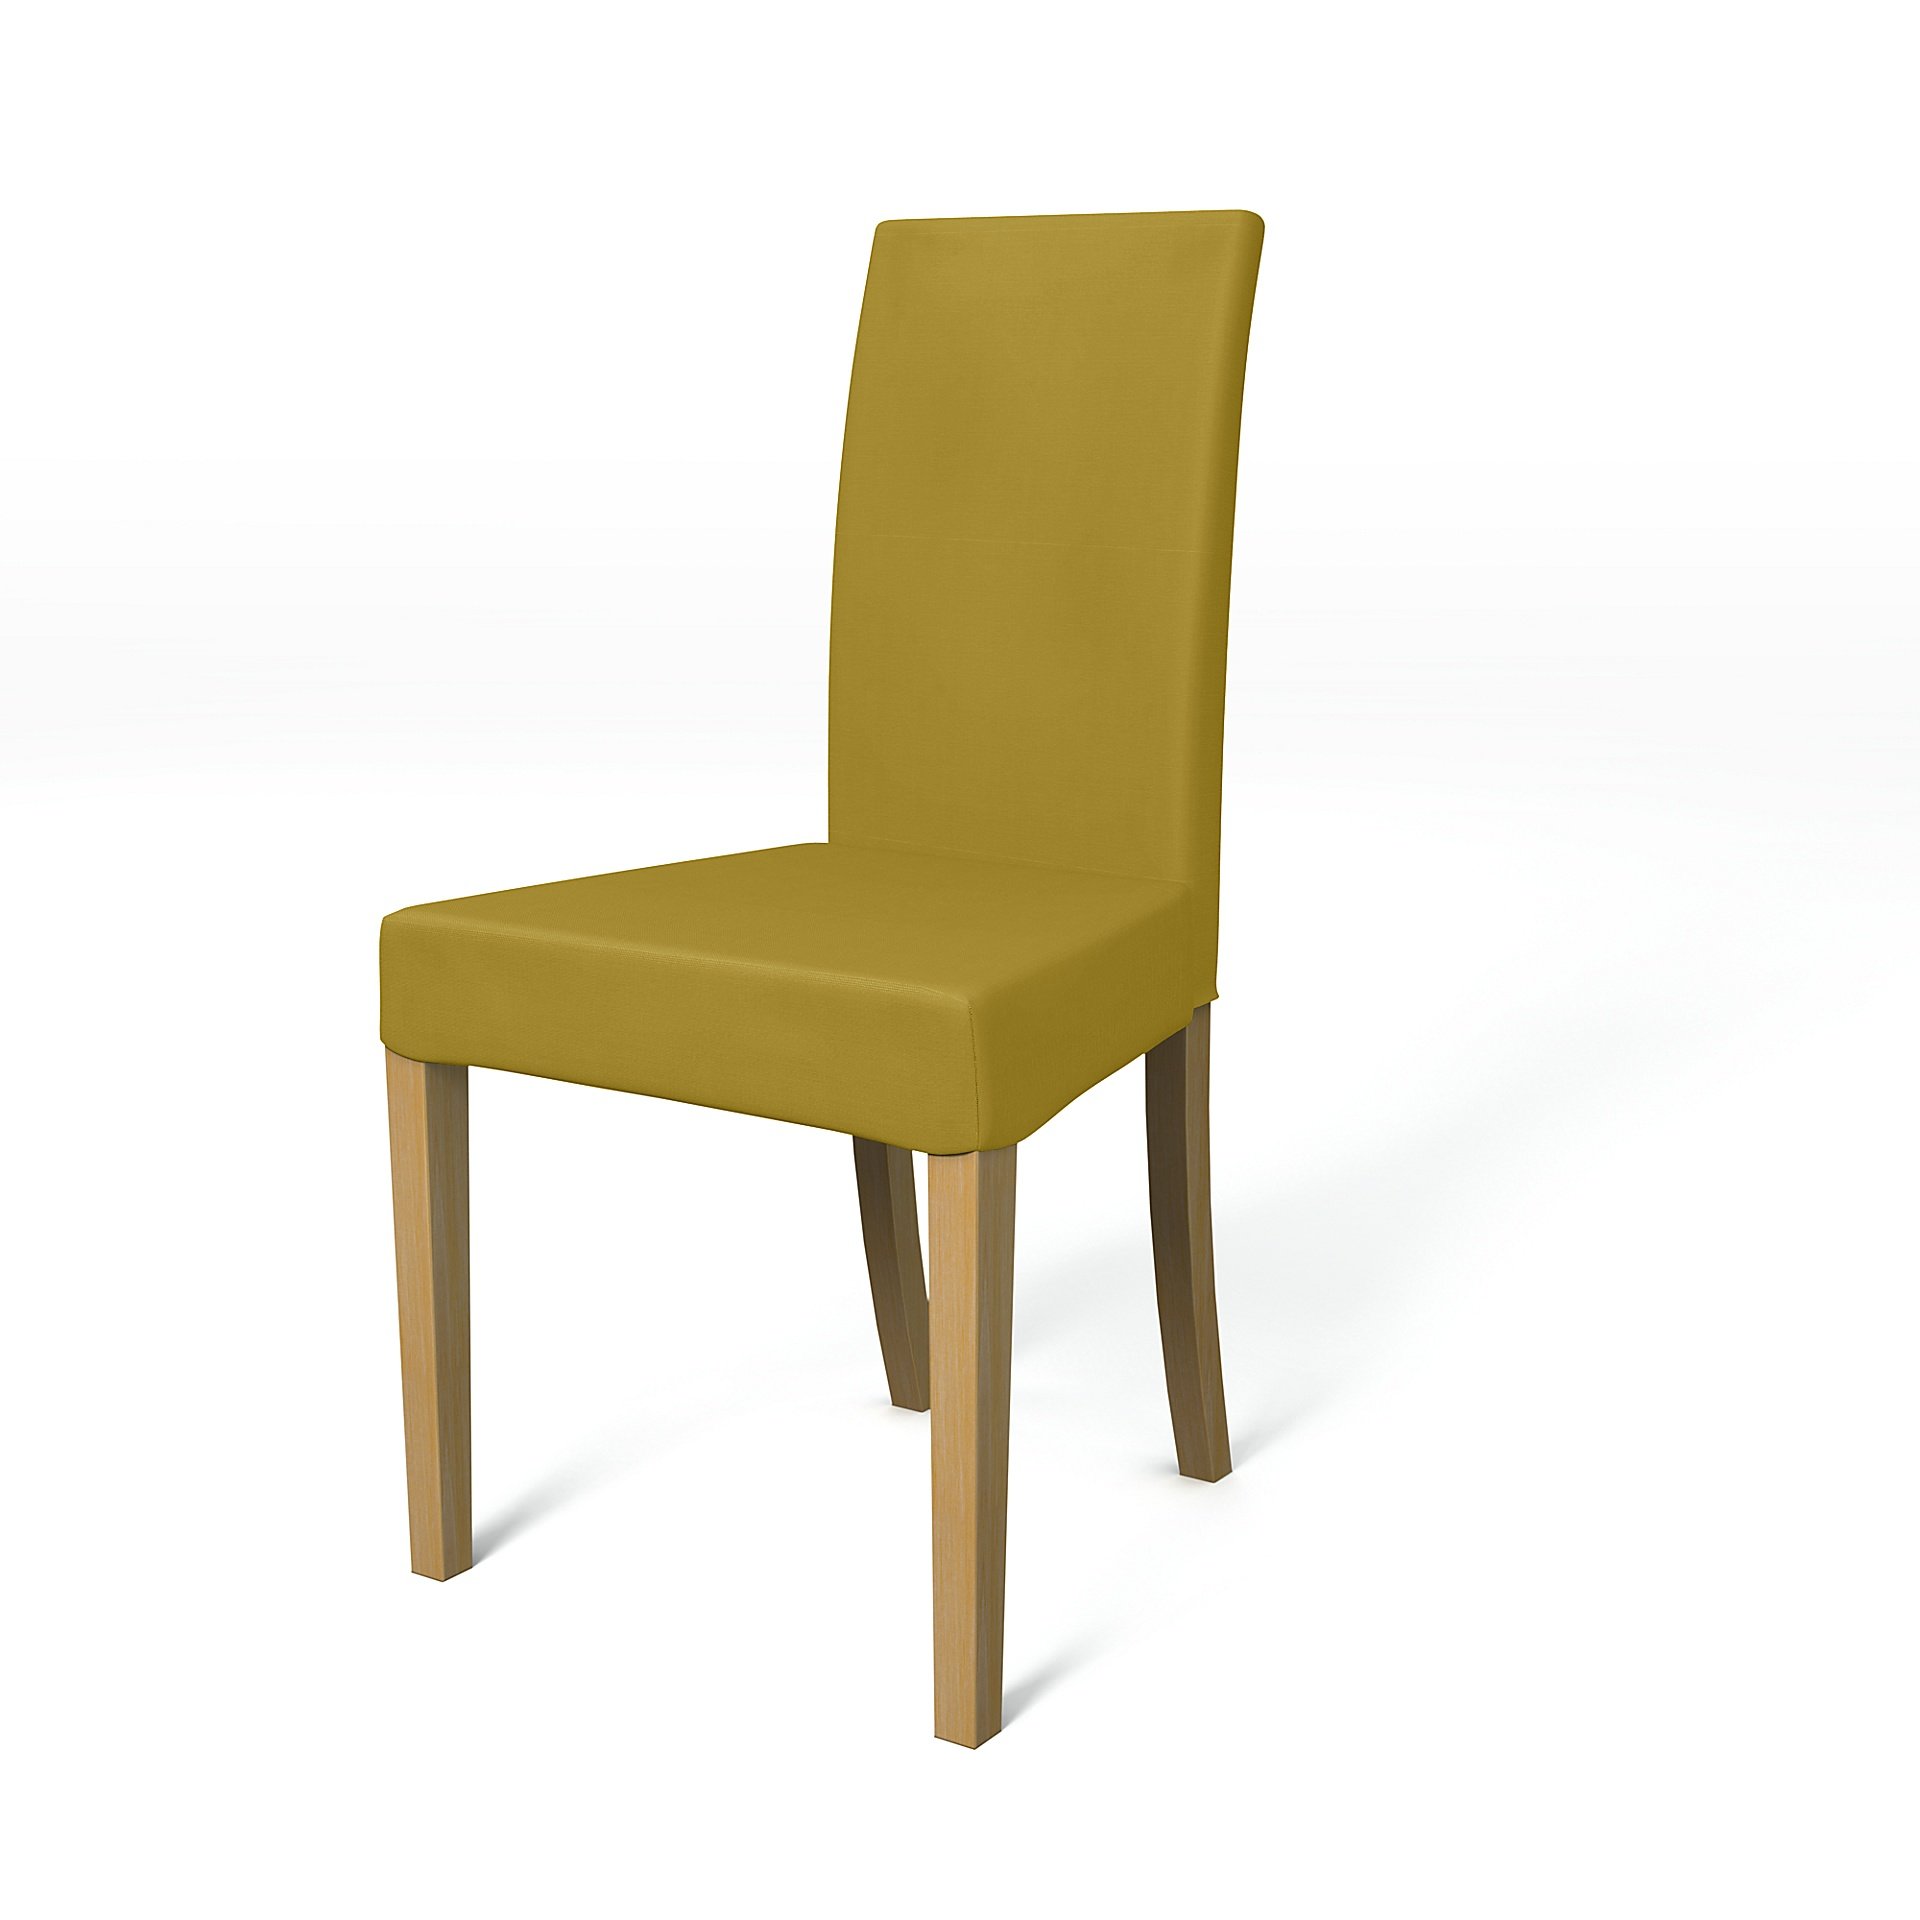 IKEA - Harry Dining Chair Cover, Olive Oil, Cotton - Bemz